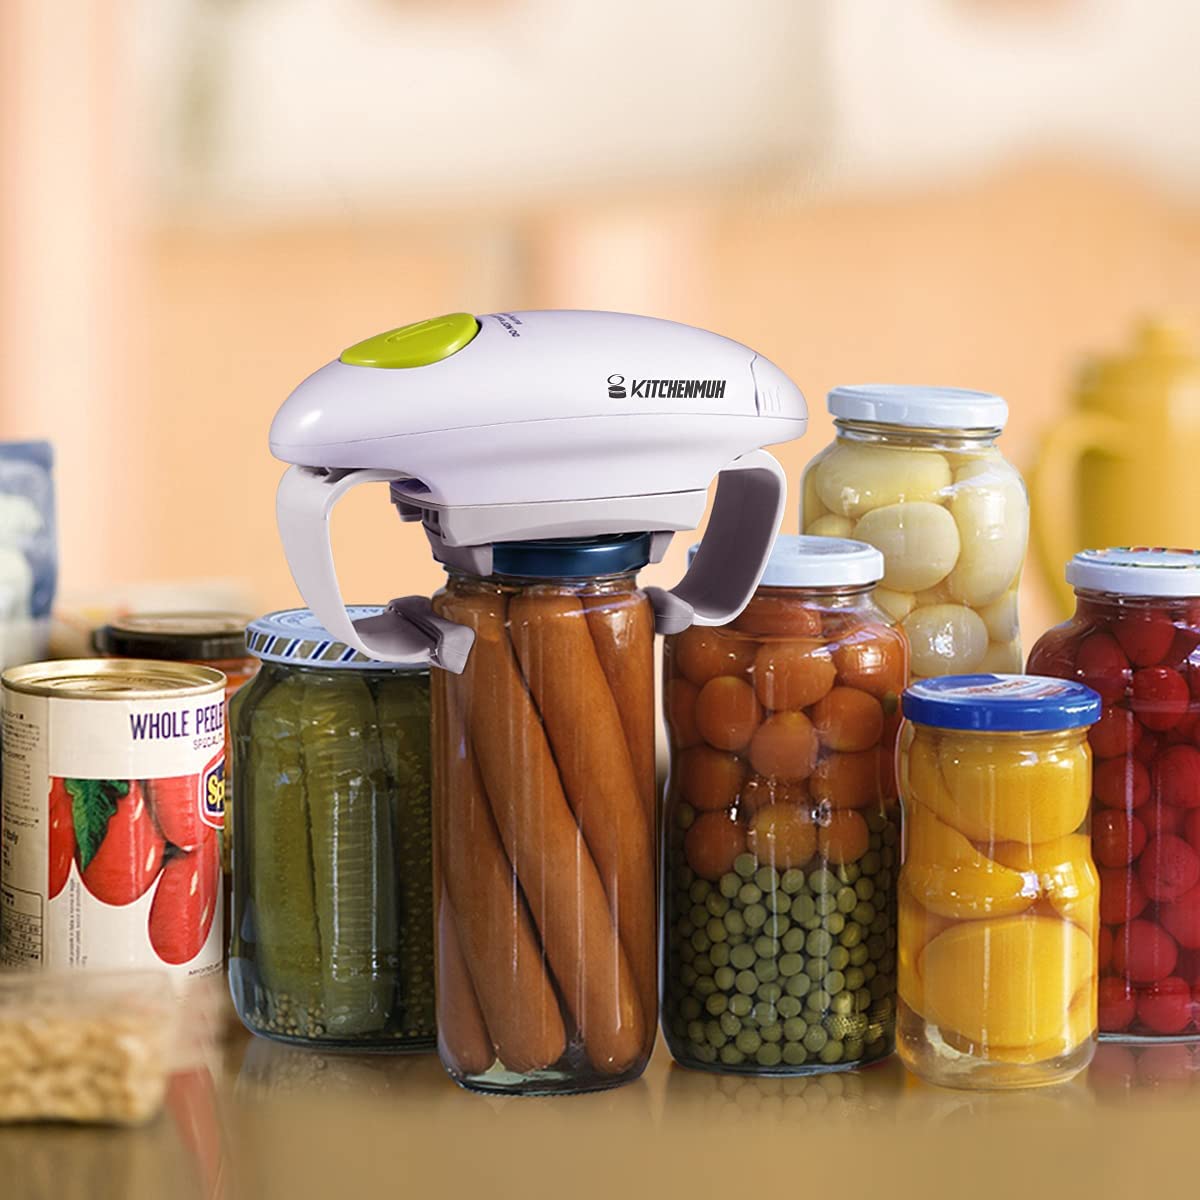 Automatic Jar Opener: 3 Best of 2022 for Arthritis & Simple Cooking